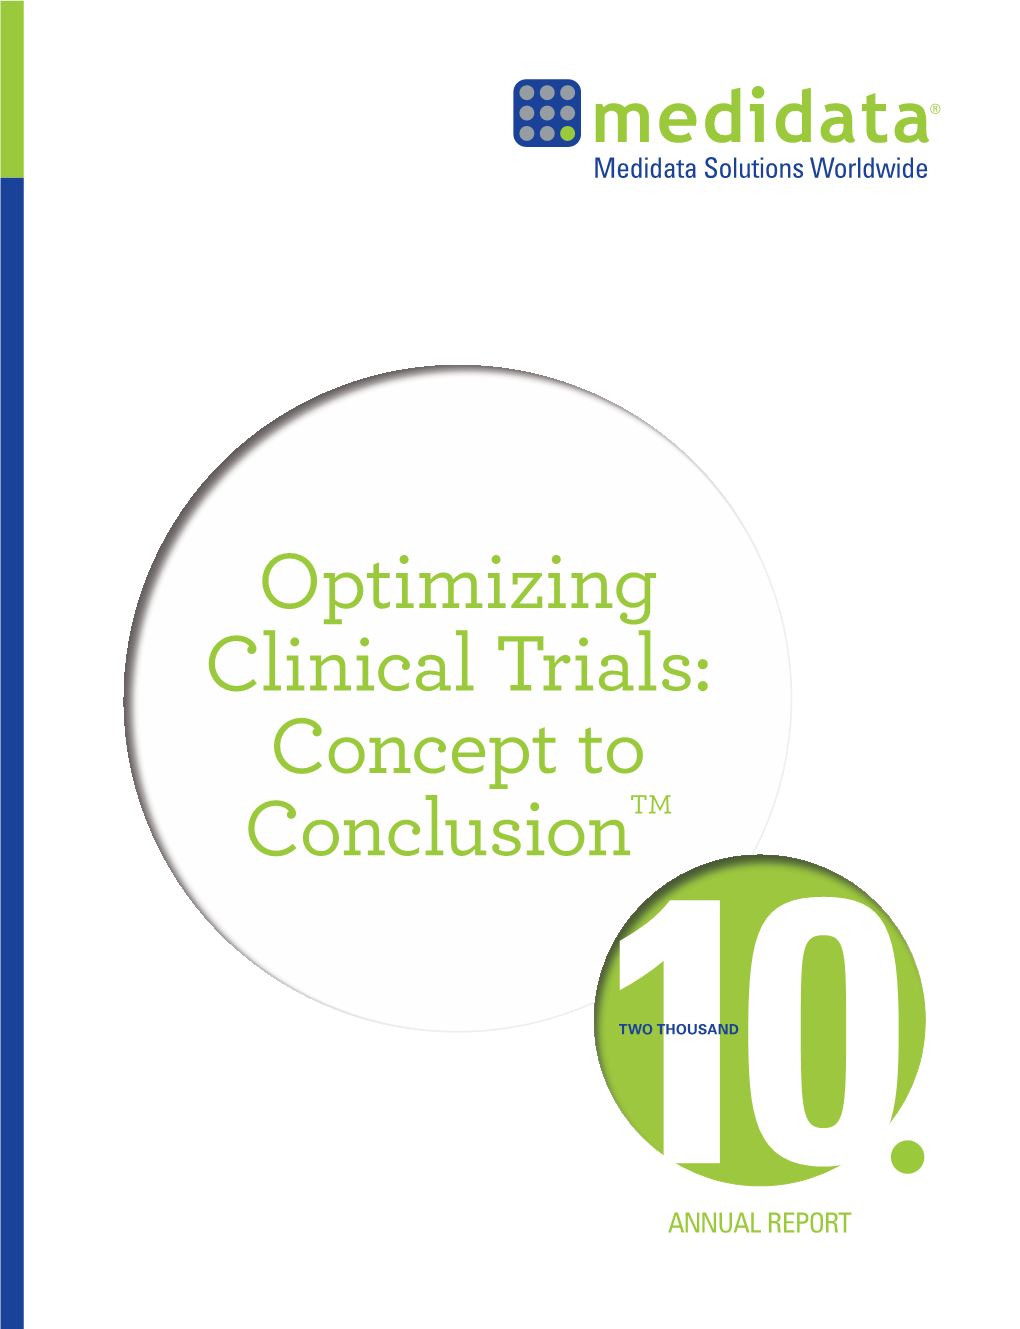 Optimizing Clinical Trials: Concept to Conclusiontm